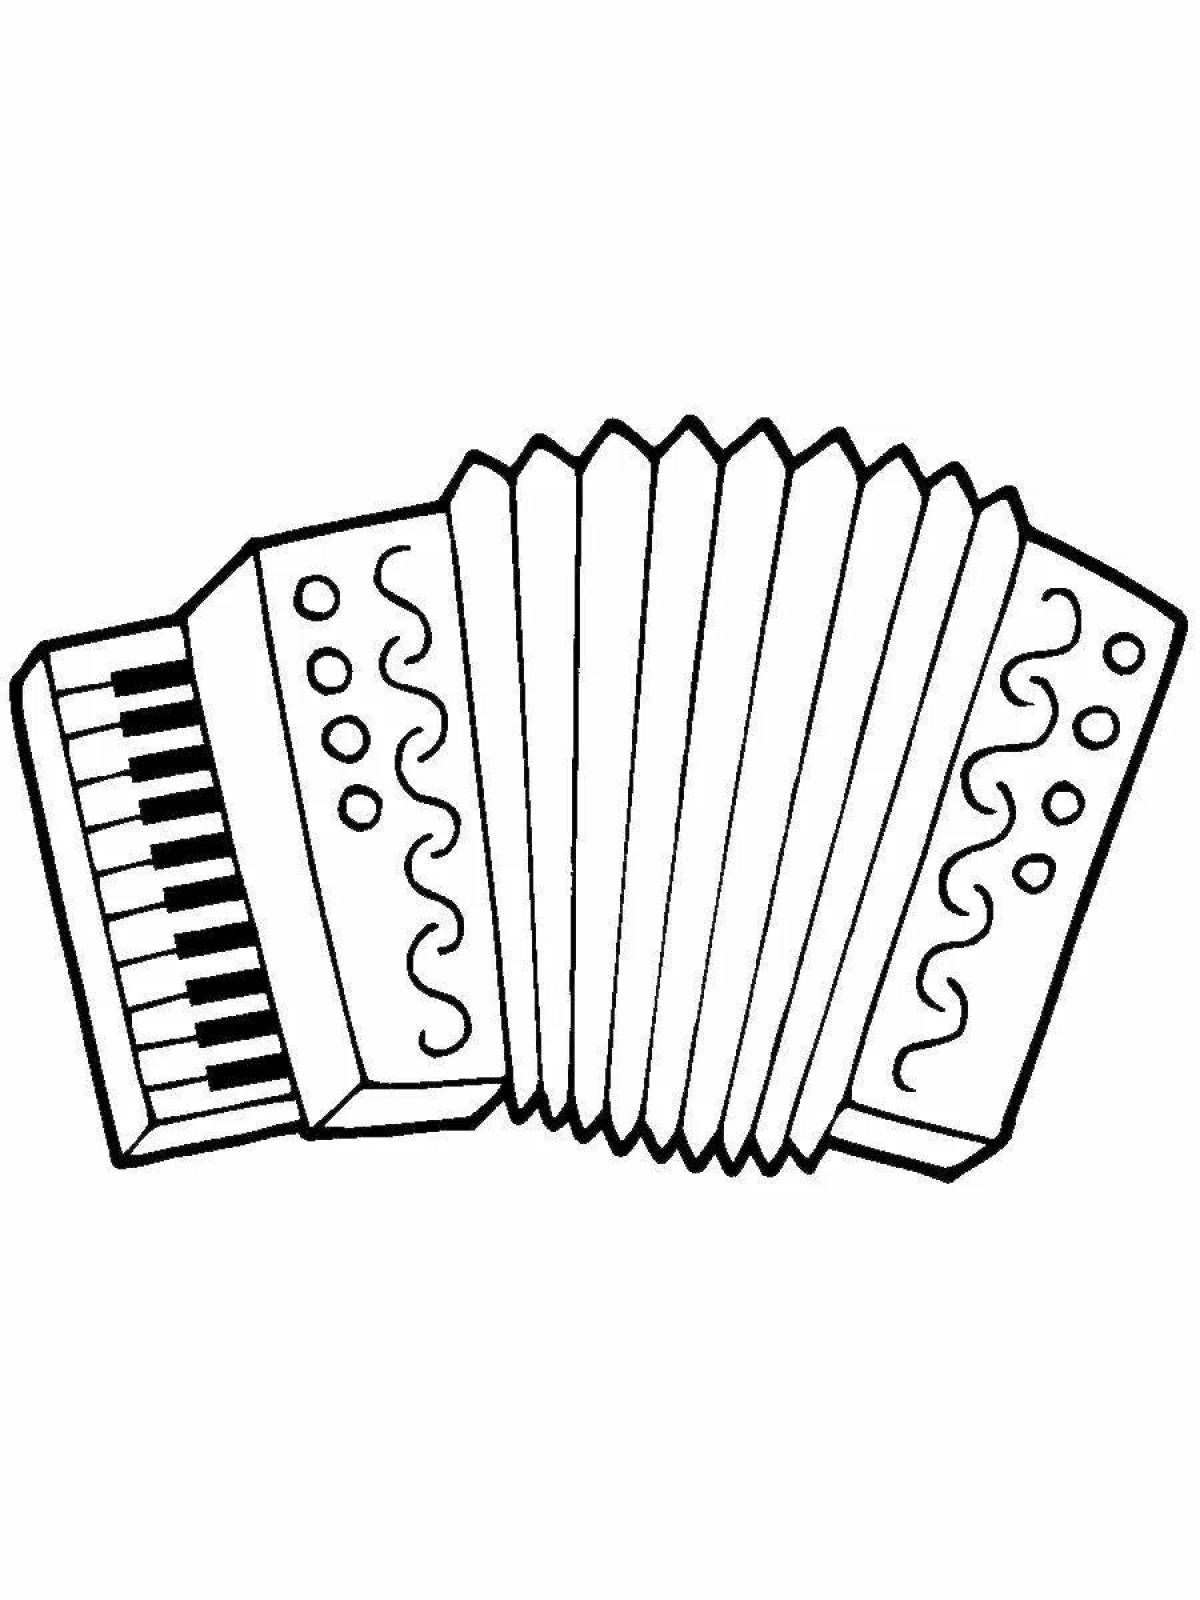 Fun coloring pages with folk musical instruments for kids